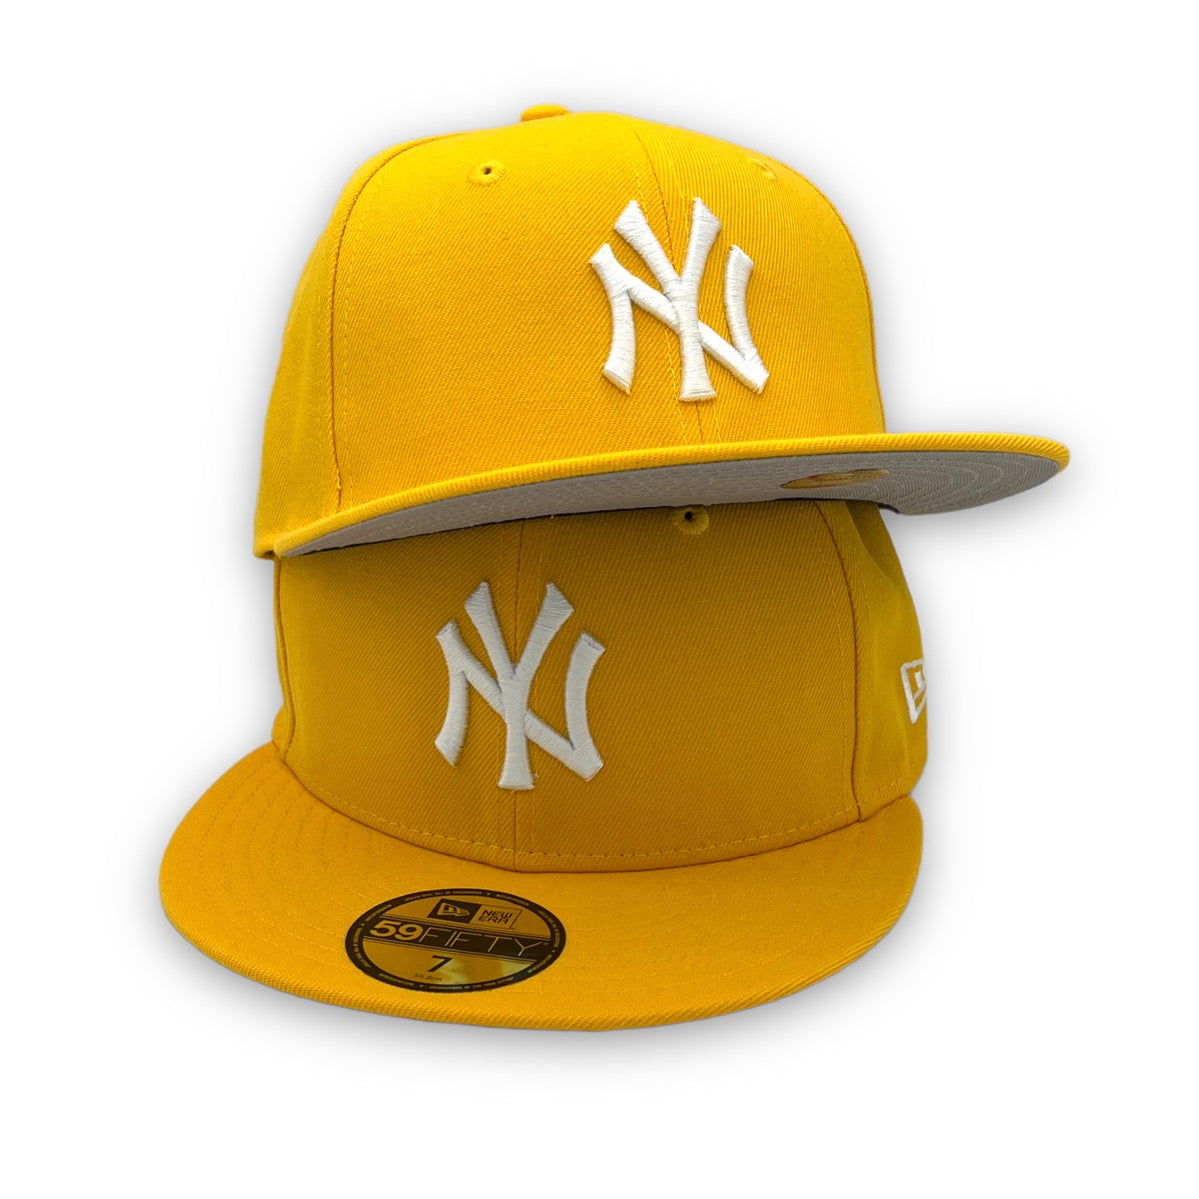 NY Yankees Basic New Era 59FIFTY Yellow Fitted Hat – USA CAP KING